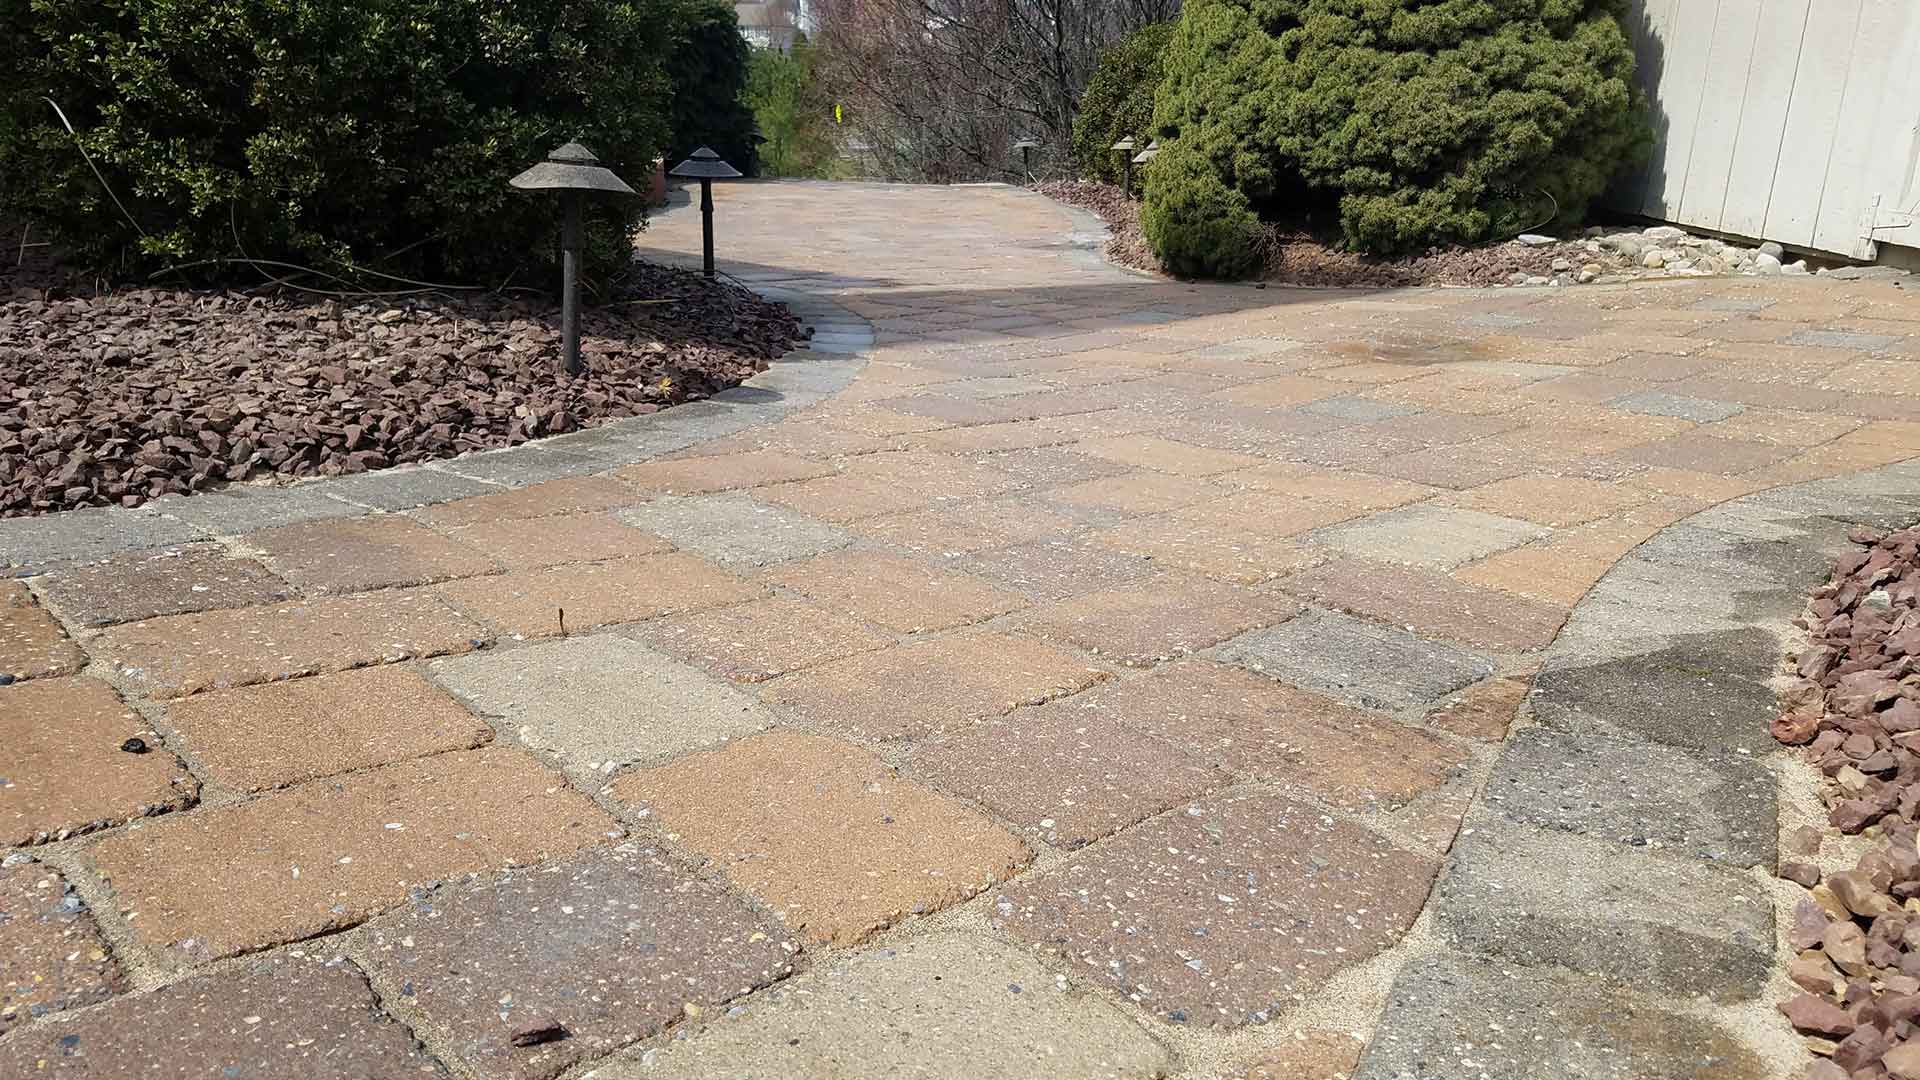 Custom paver walkway installed at a home in East Greenville, PA.